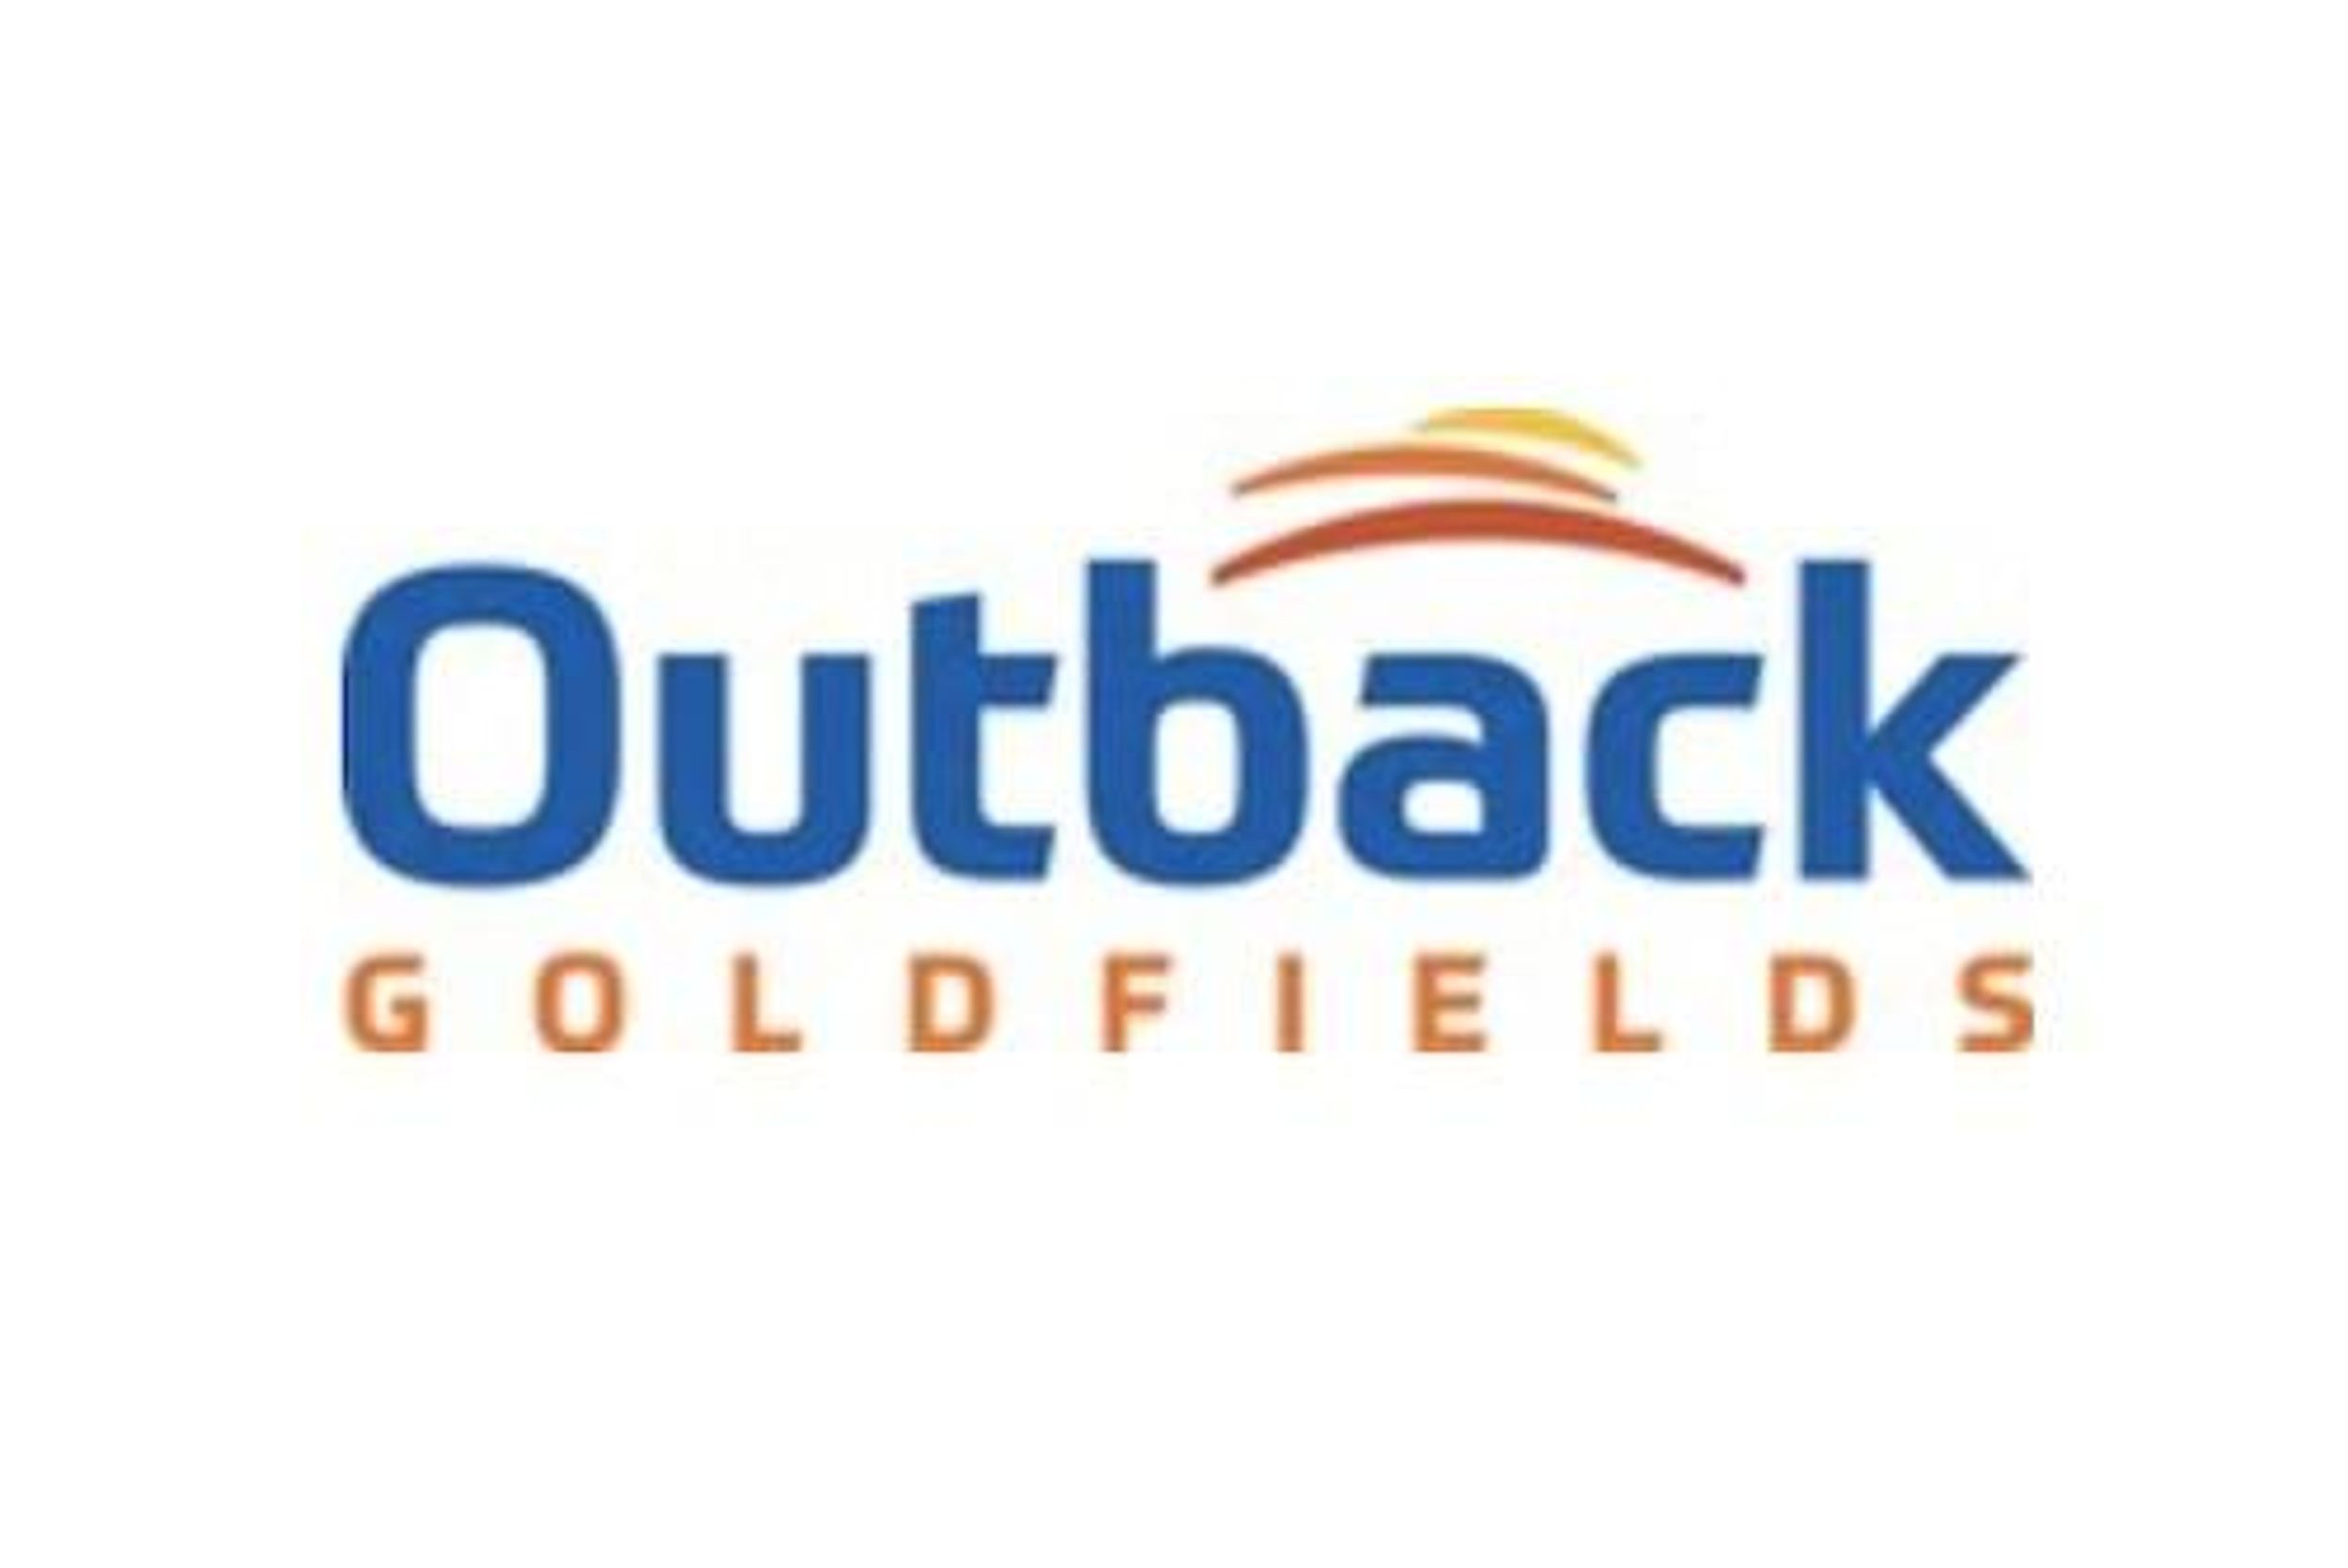 InvestmentPitch Media Video Discusses Outback Goldfields' Update on Completed Initial Exploration Phase on its Yeungroon Gold Property Located in Central Victoria, Australia.